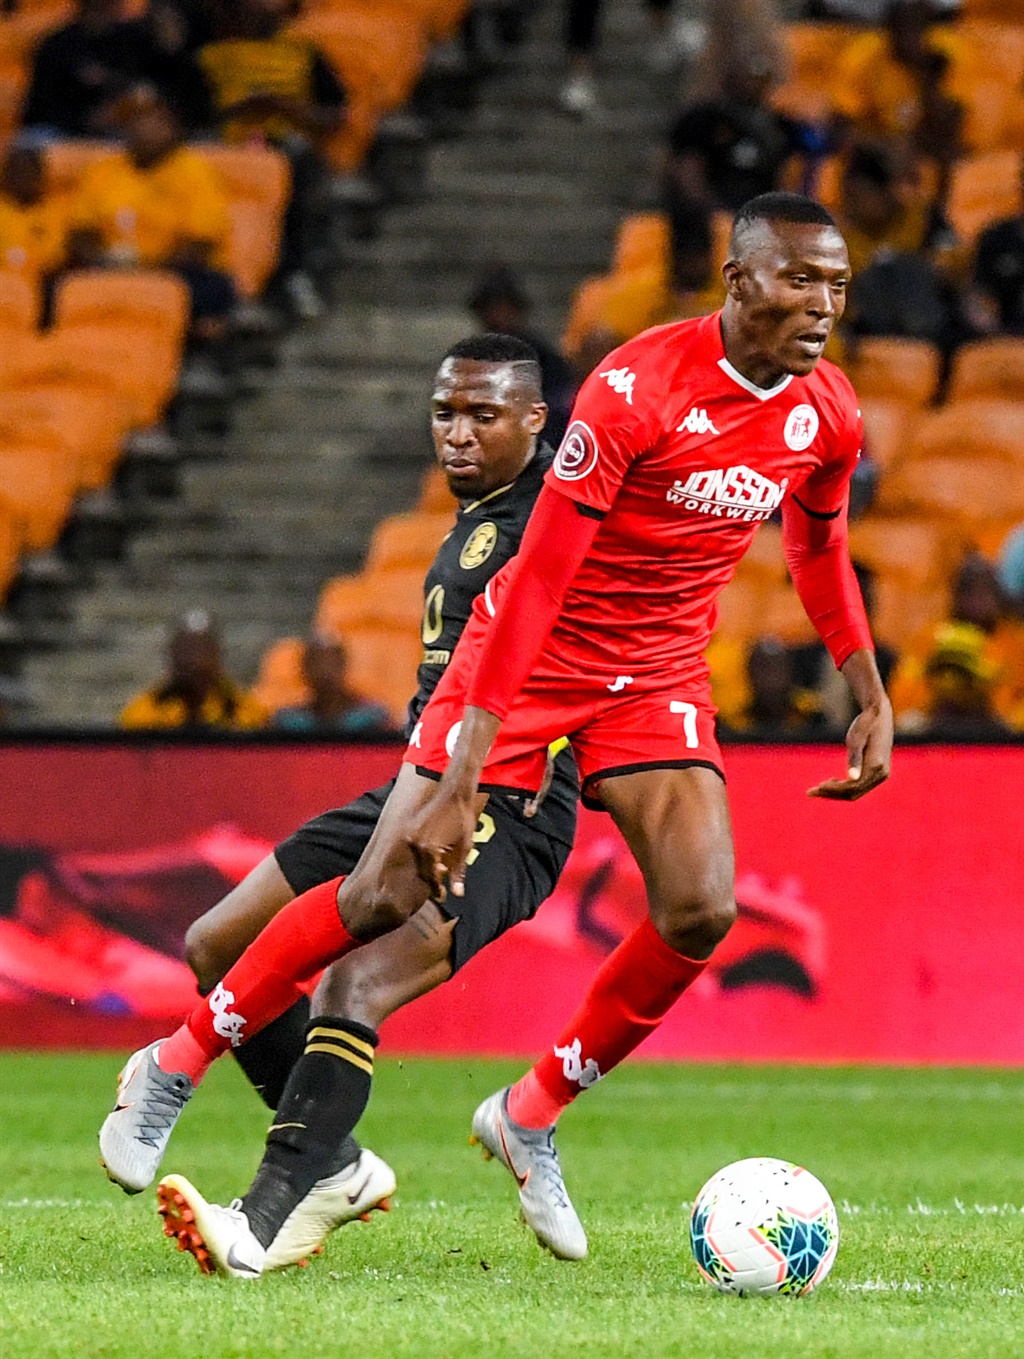 Tendai Ndoro of Highlands Park with possession during Absa Premiership match between Kaizer Chiefs and Highlands Park at FNB Stadium on January 08, 2020 in Johannesburg, South Africa. (Photo by Sydney Seshibedi/Gallo Images)